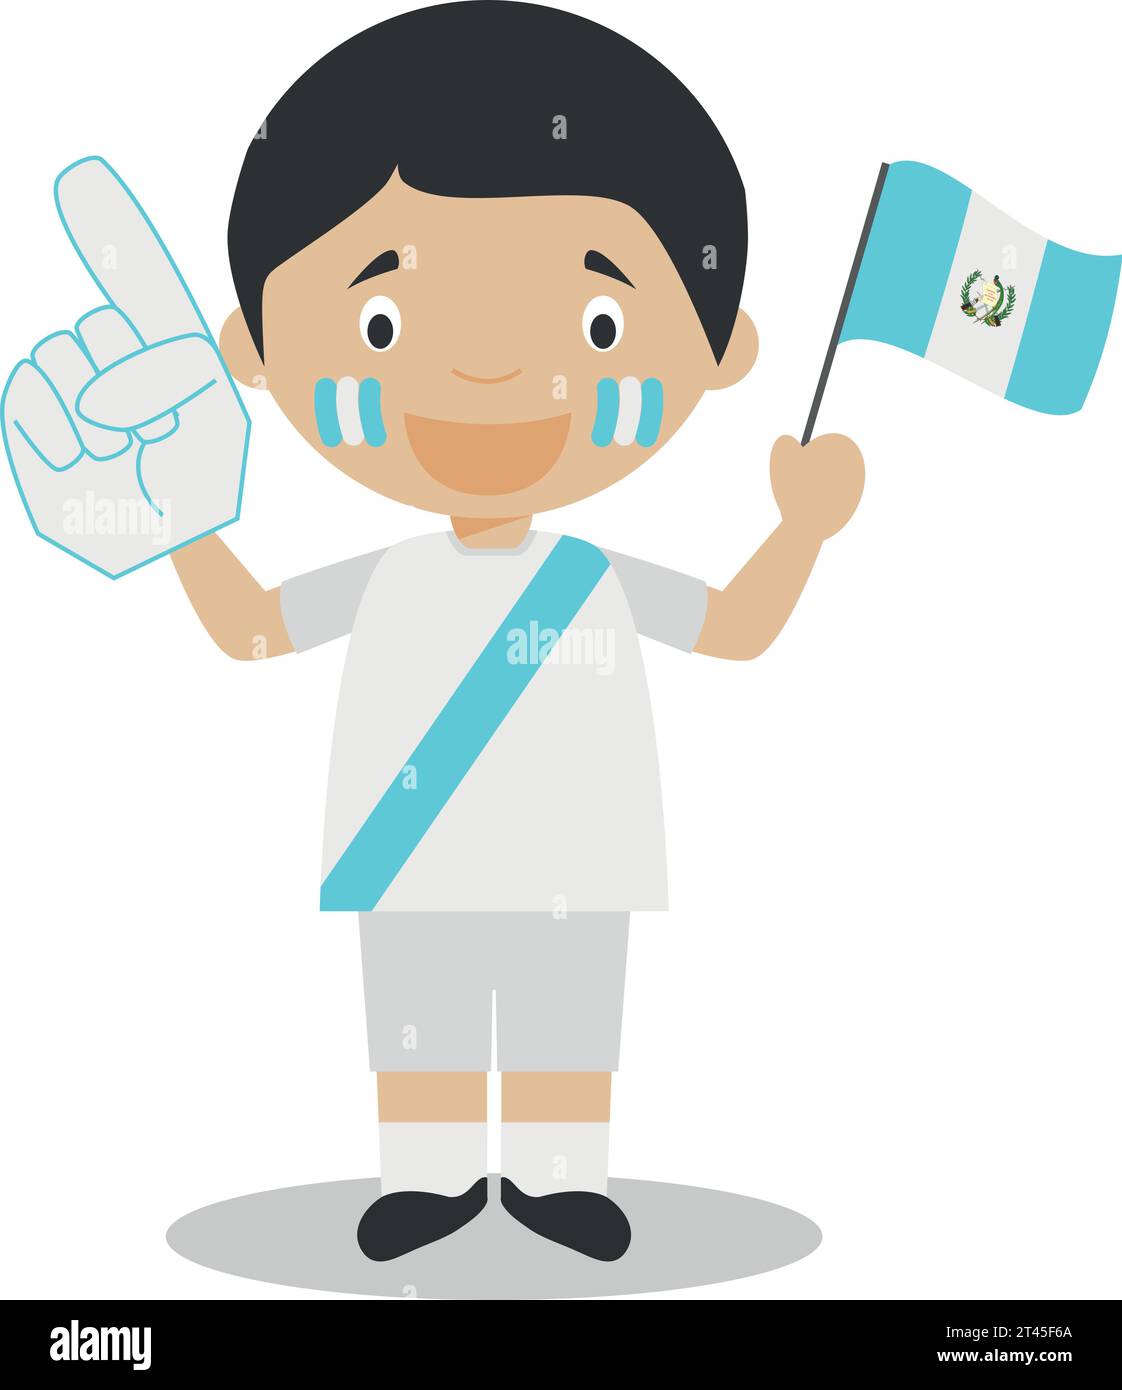 National sport team fan from Guatemala with flag and glove Vector Illustration Stock Vector